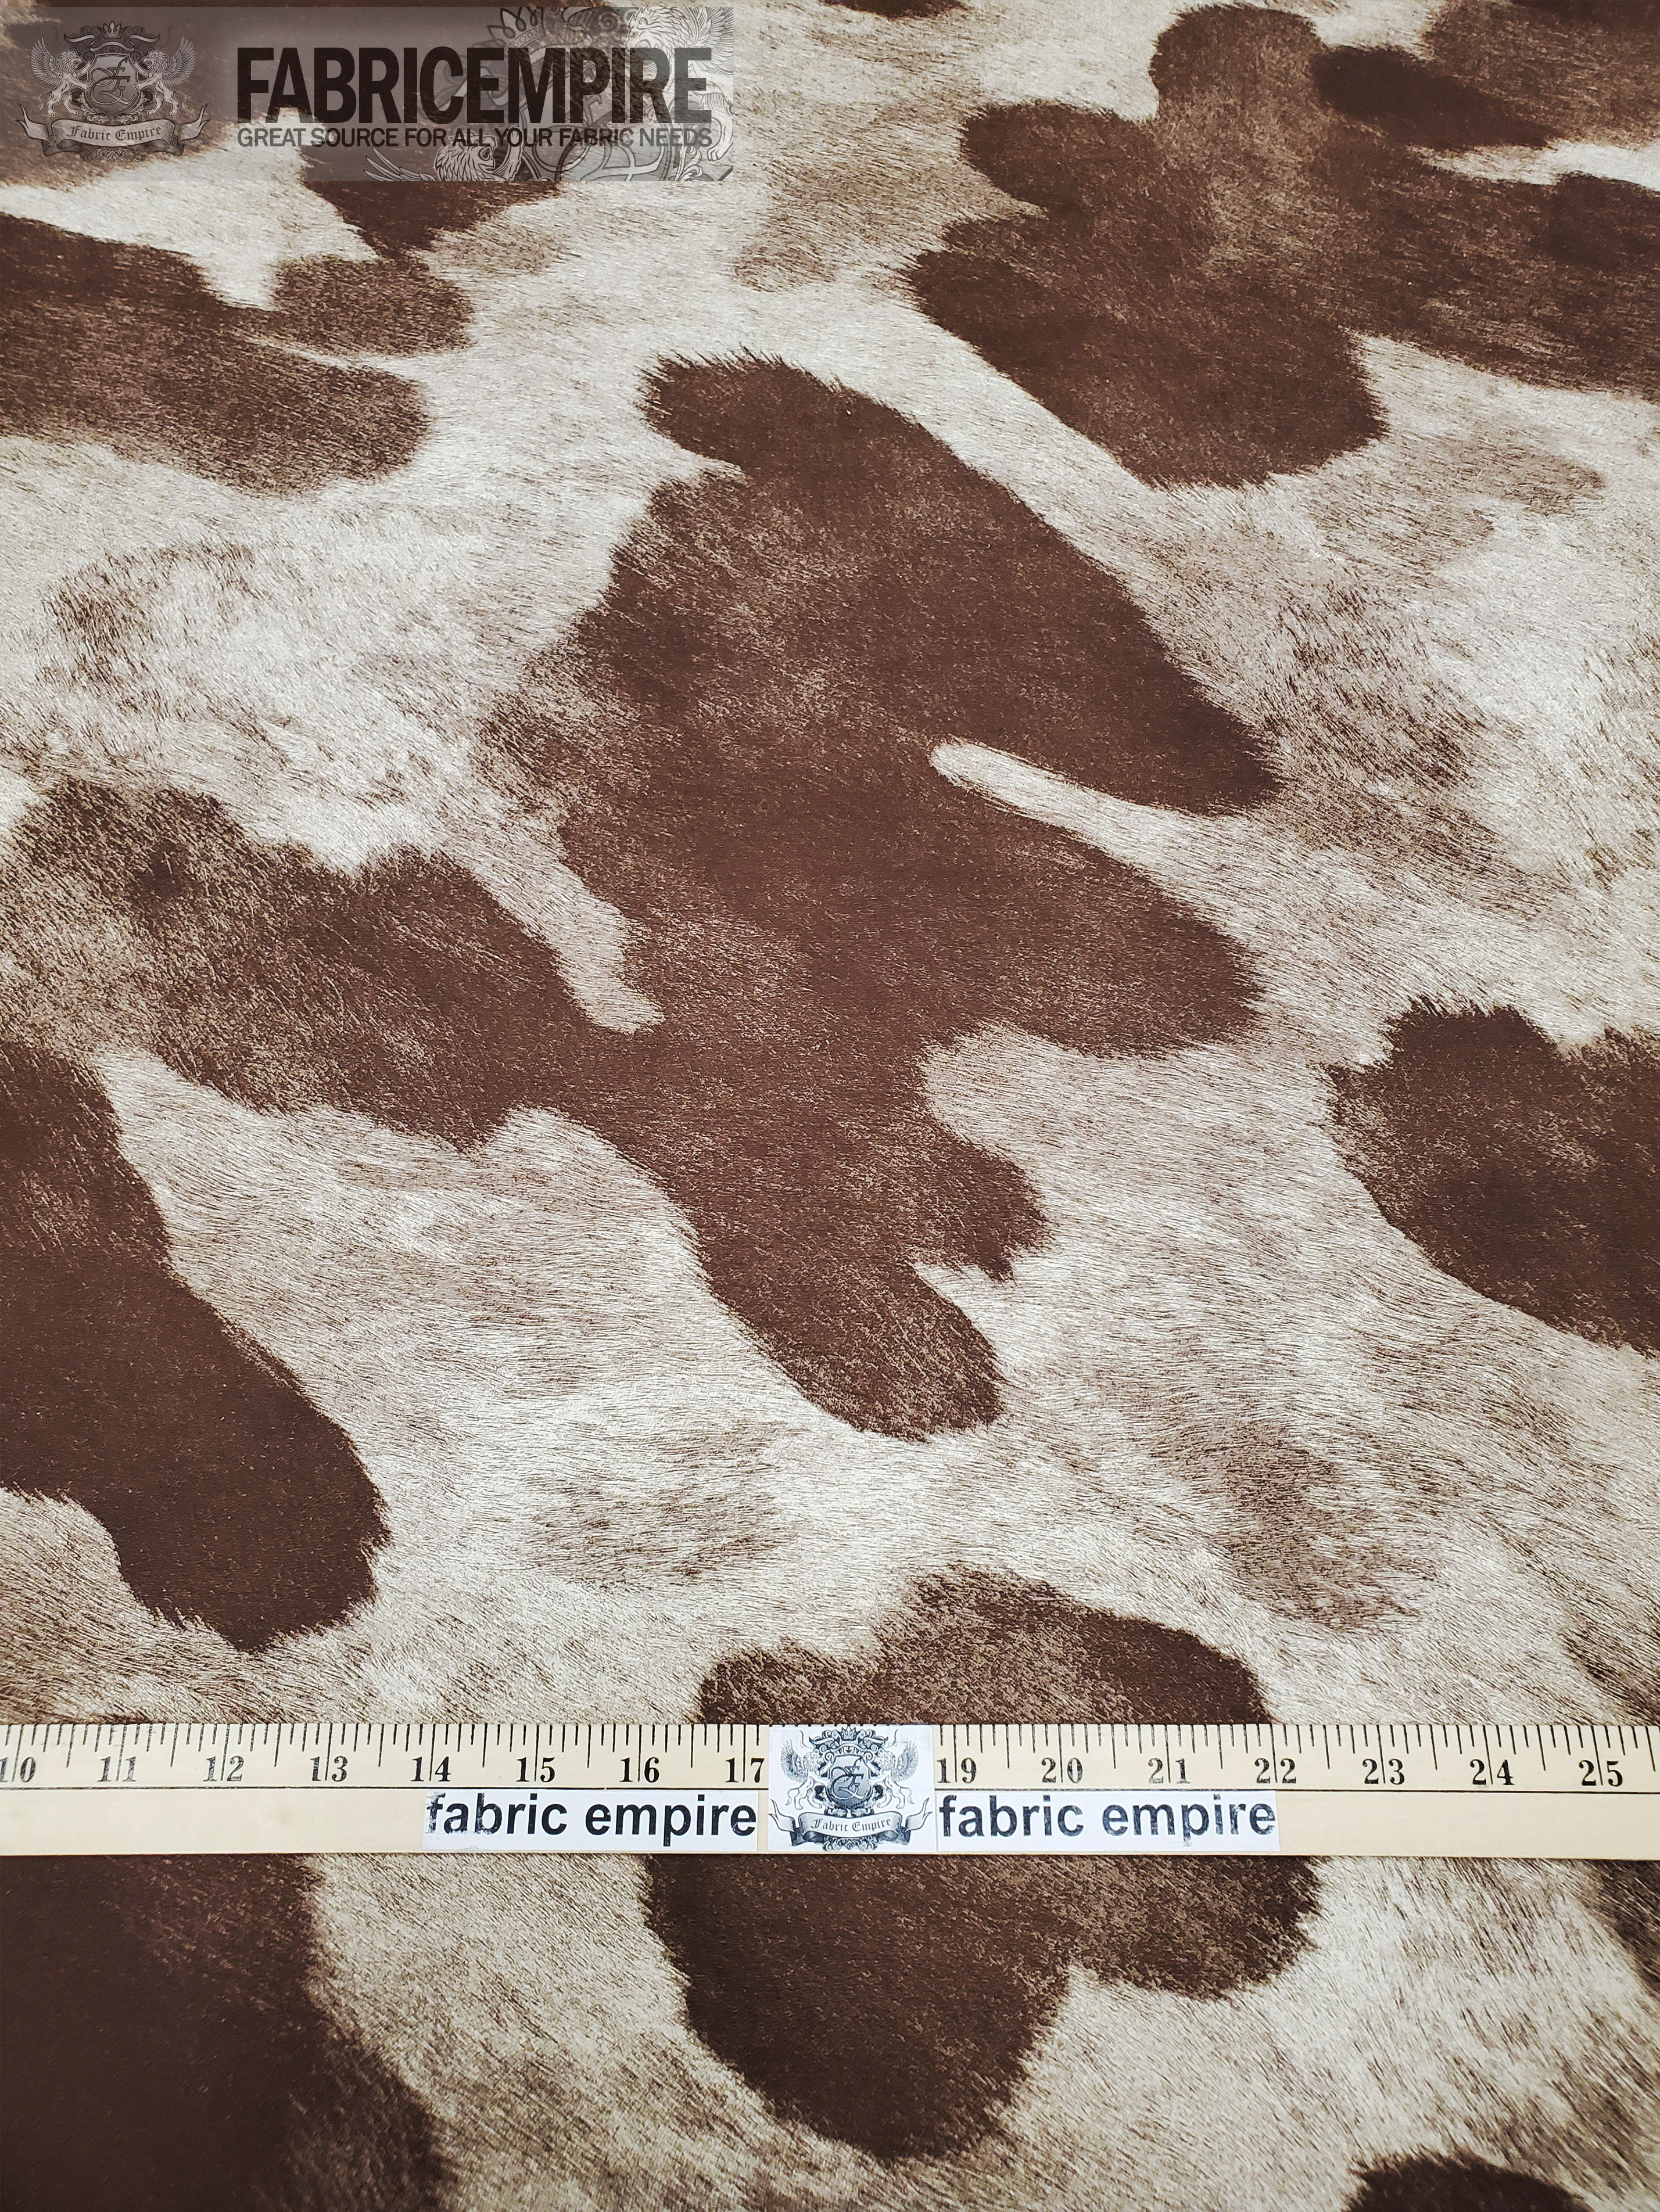 Vinyl Upholstery Embossed Texture Fabric Horse Brown Fake Leather